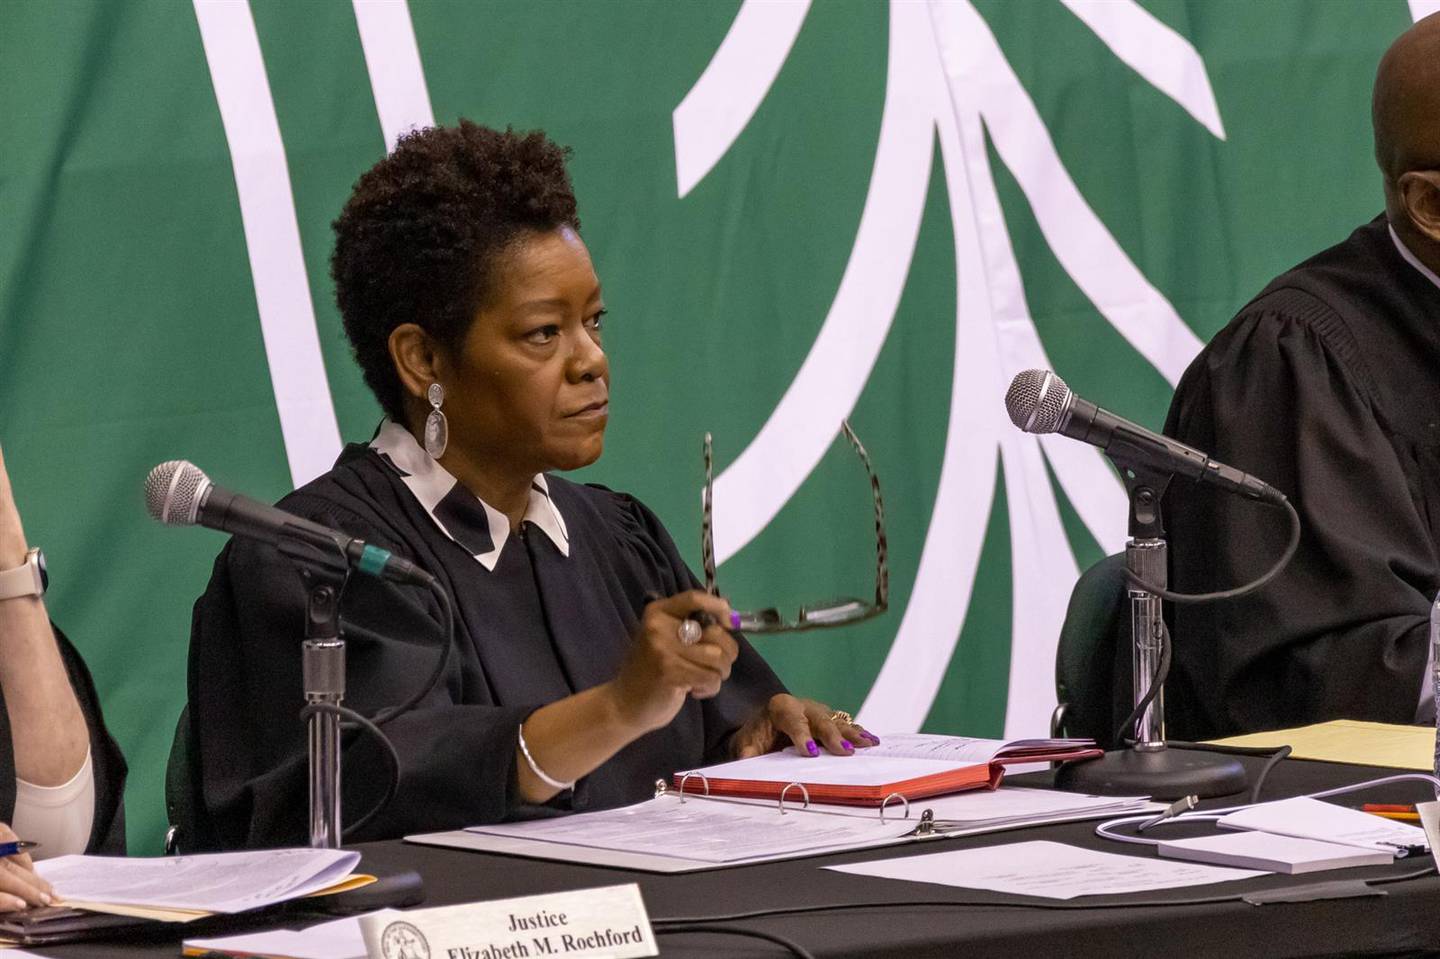 Illinois Supreme Court Justice Lisa Holder White asks questions at the court's remote oral arguments held on the campus of Chicago State University on May 11.